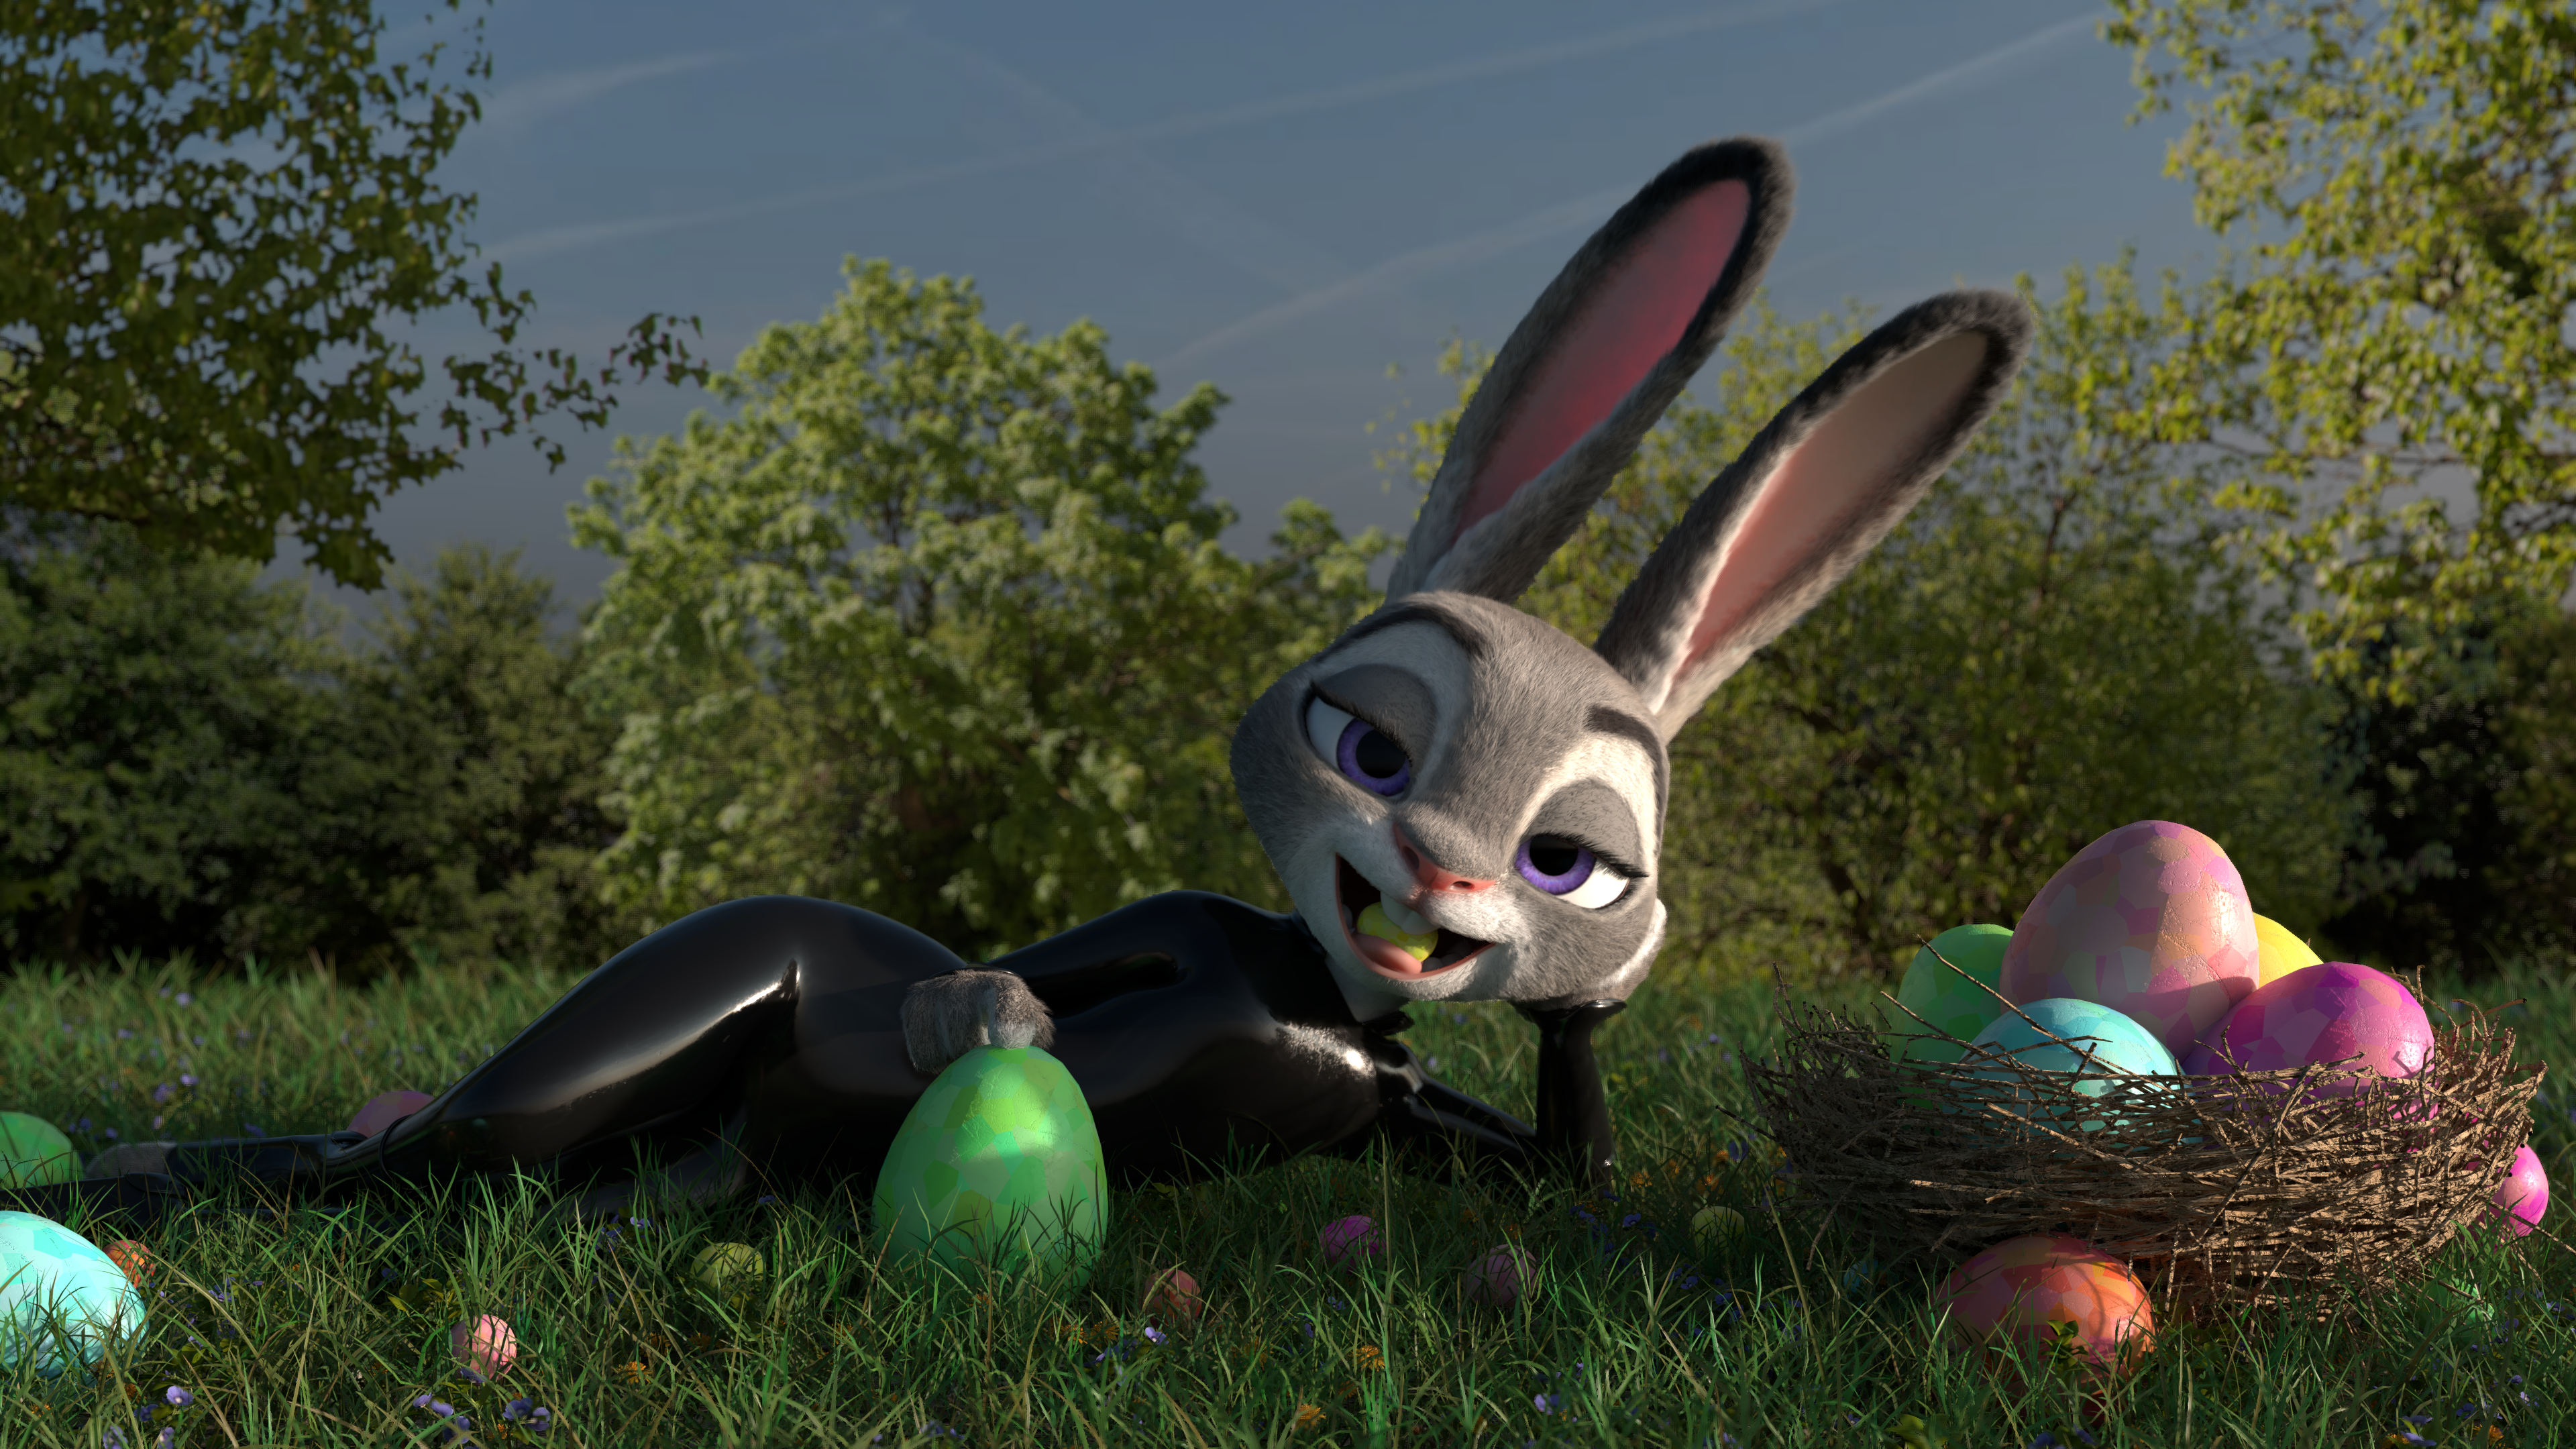 General 3840x2160 Zootopia Judy Hopps bunny girl bunny ears latex black latex easter eggs Anthro digital art lying down lying on side furry looking at viewer grass trees